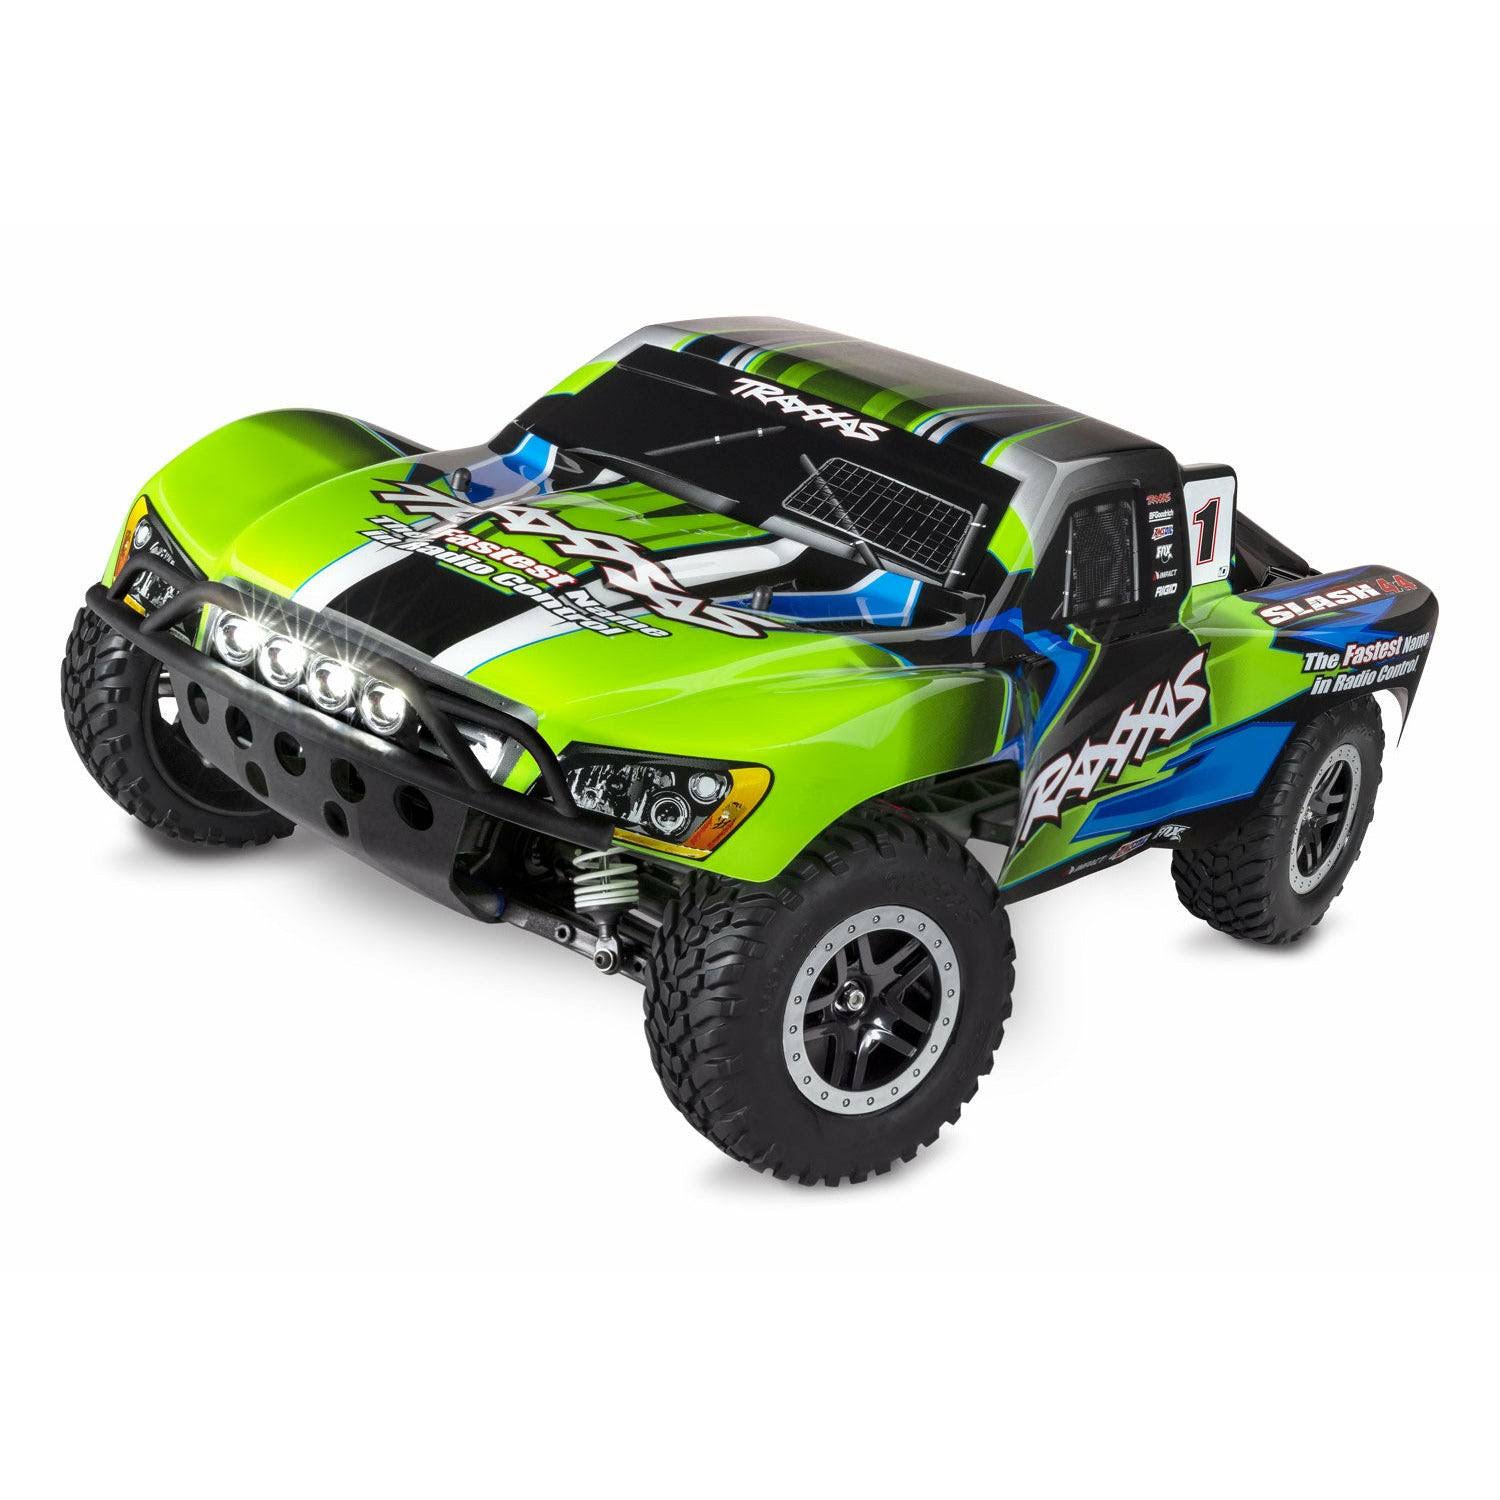 Traxxas Slash 4x4 RTR 4WD Brushed Short Course Truck (Green) w/LED Lights 68054-61GRN